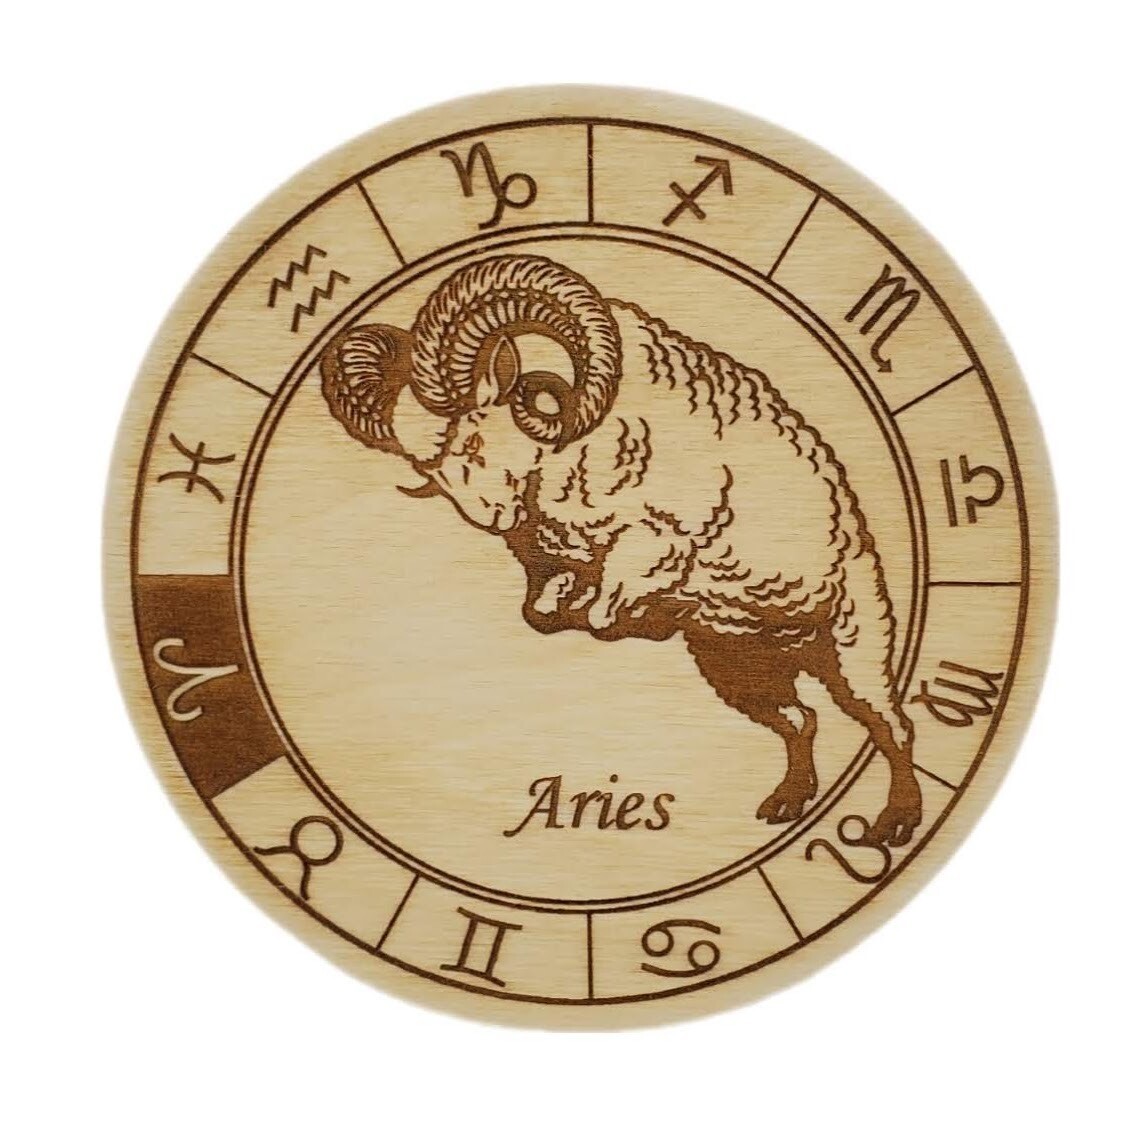 ENGRAVED ARIES PLATE